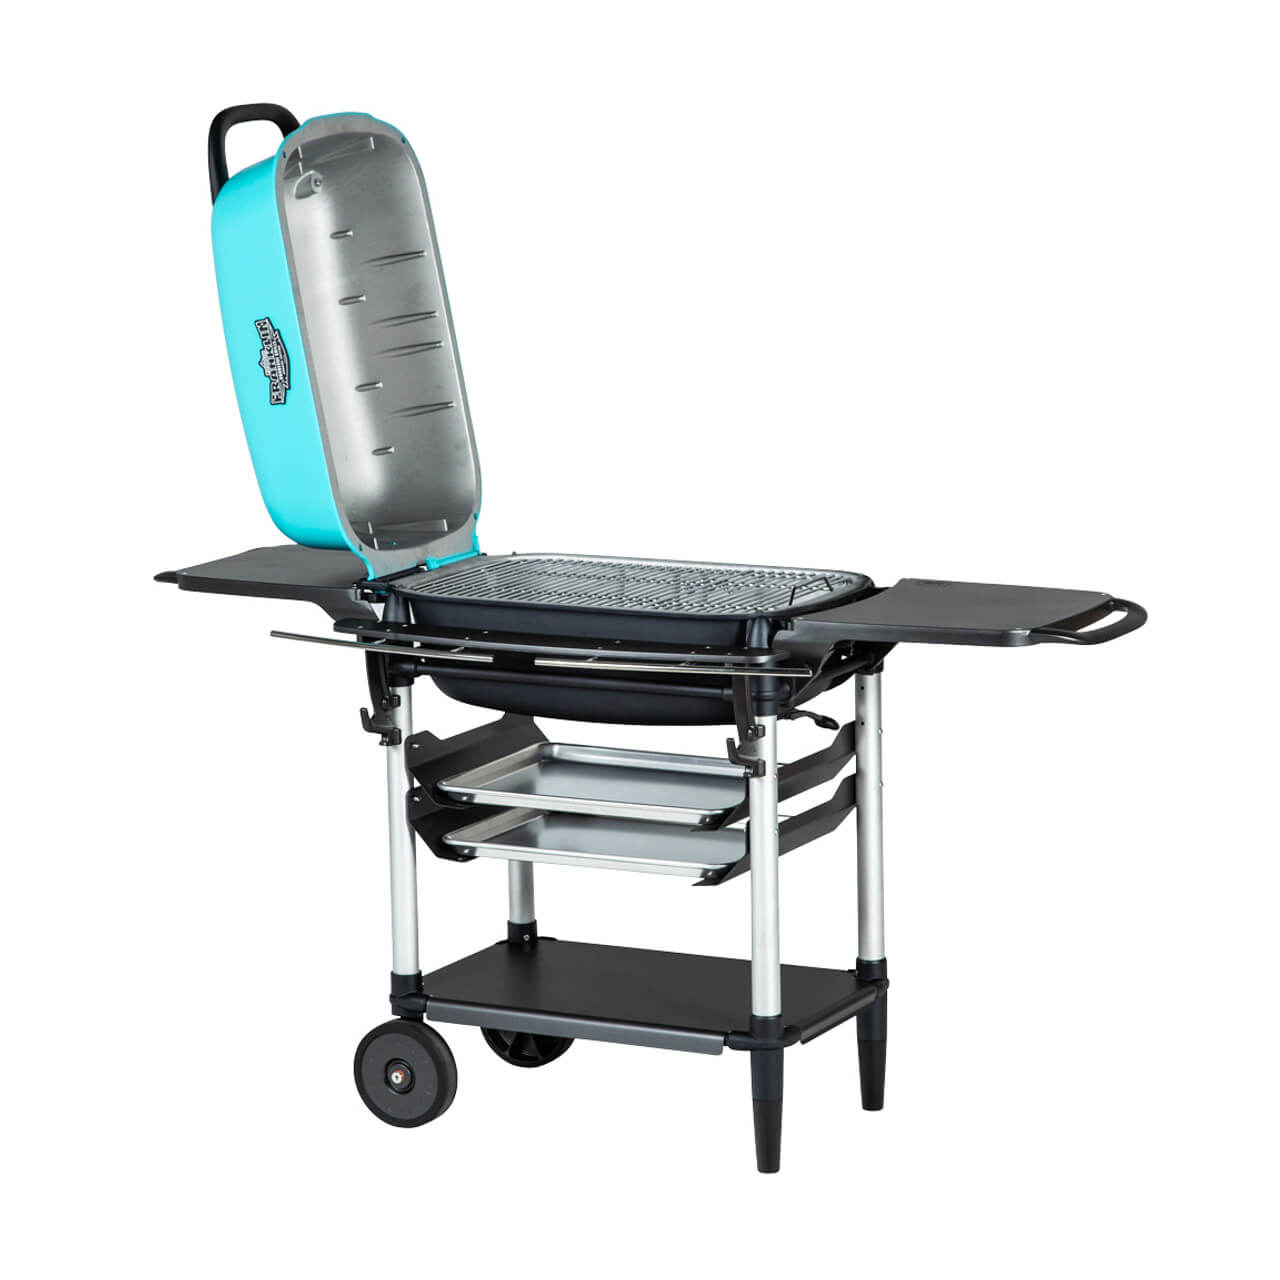 PK Grills PK300AF Grill and Smoker - Teal